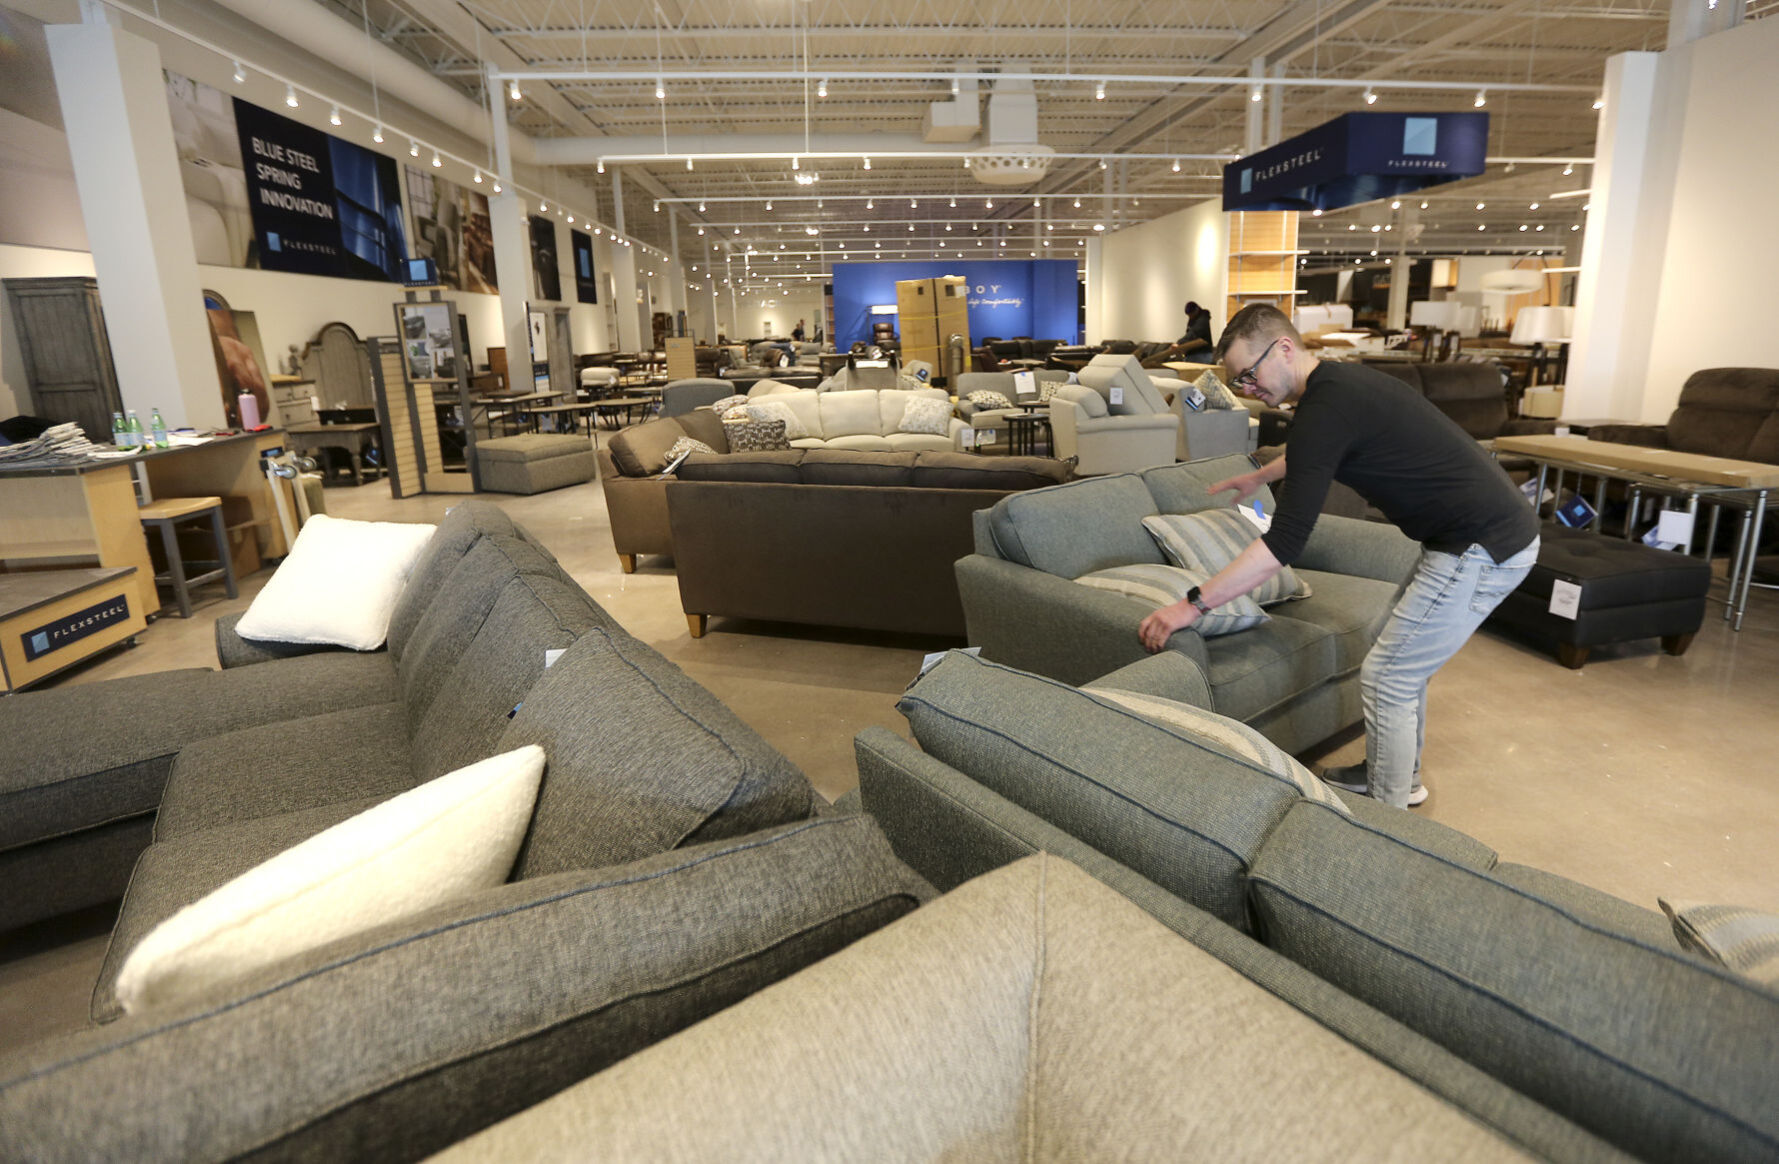 Will Ambroson, lead designer with Flexsteel Industries, arranges furniture Thursday inside the new Slumberland Furniture store, located in Plaza 20 in Dubuque. The store is scheduled to open on Saturday, March 27. PHOTO CREDIT: Dave Kettering